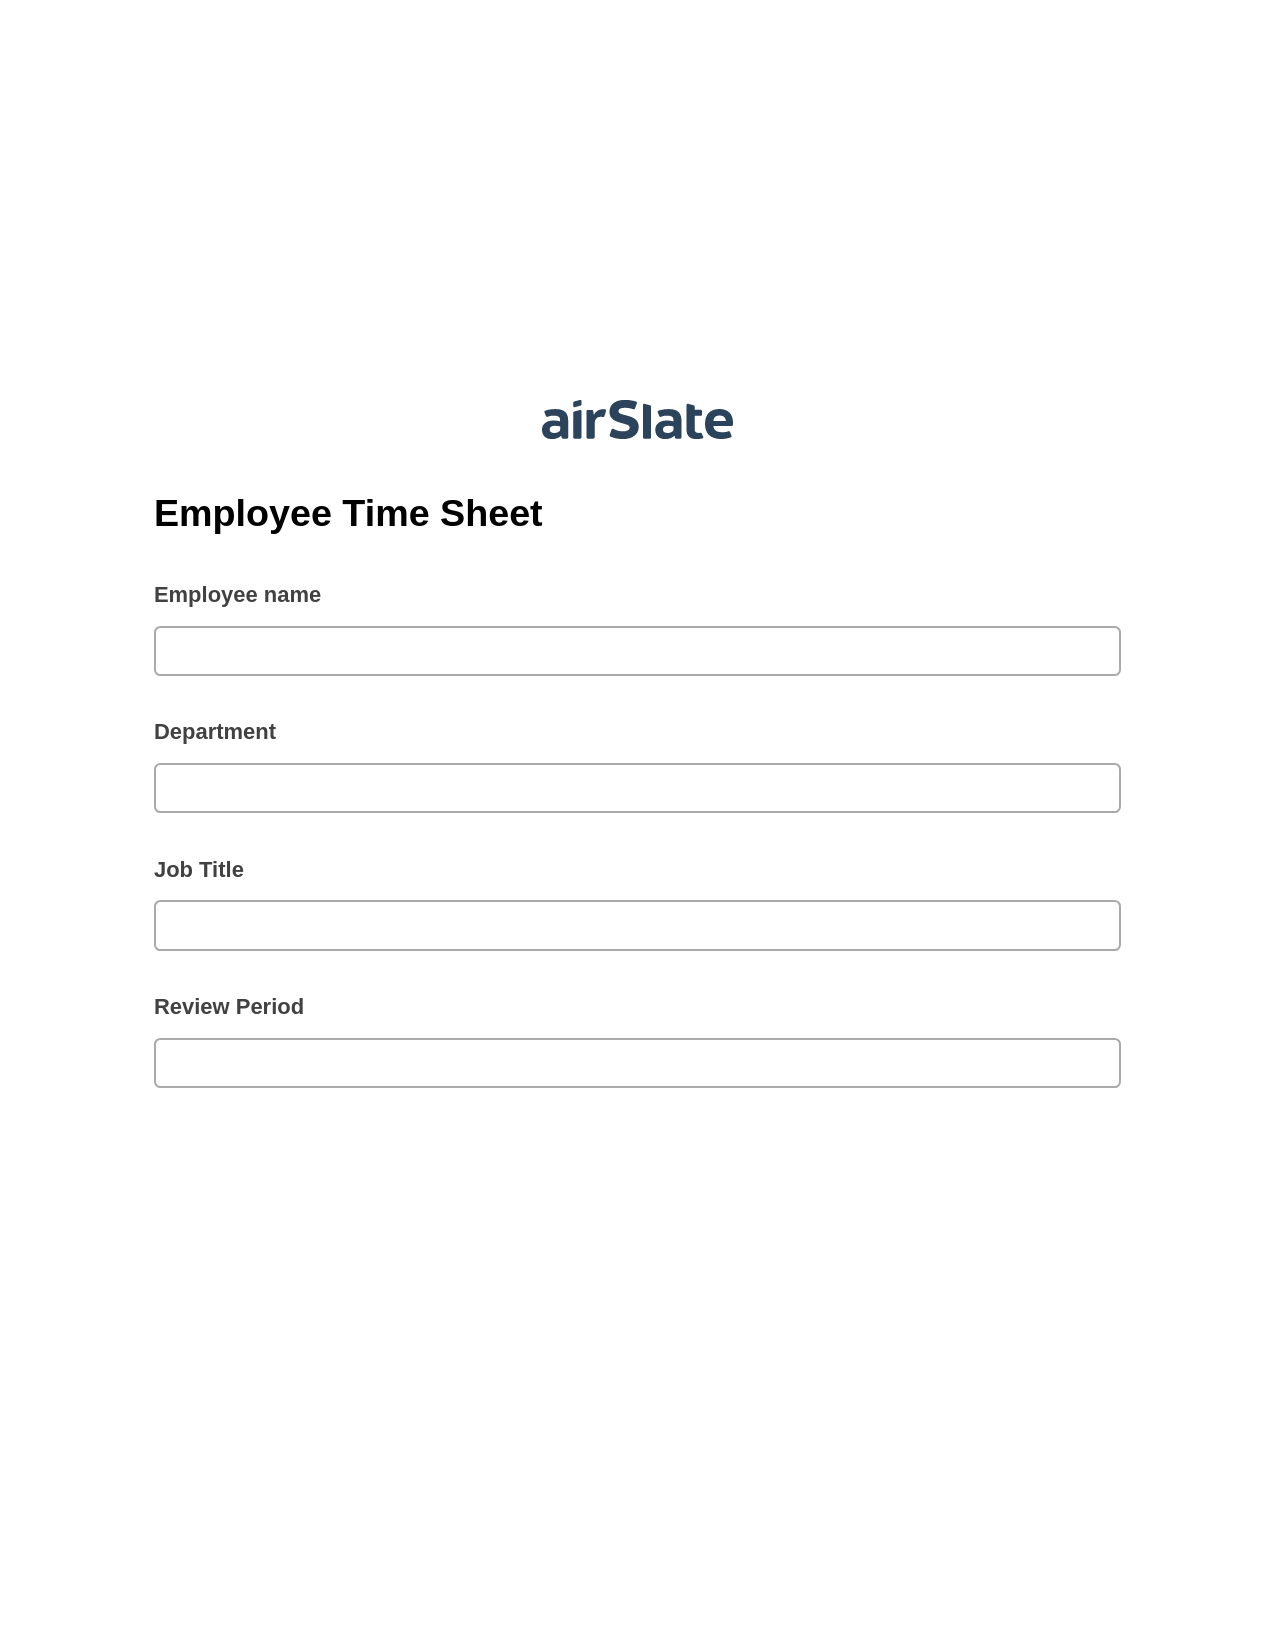 Employee Time Sheet Pre-fill from another Slate Bot, Update Audit Trail Bot, Webhook Postfinish Bot